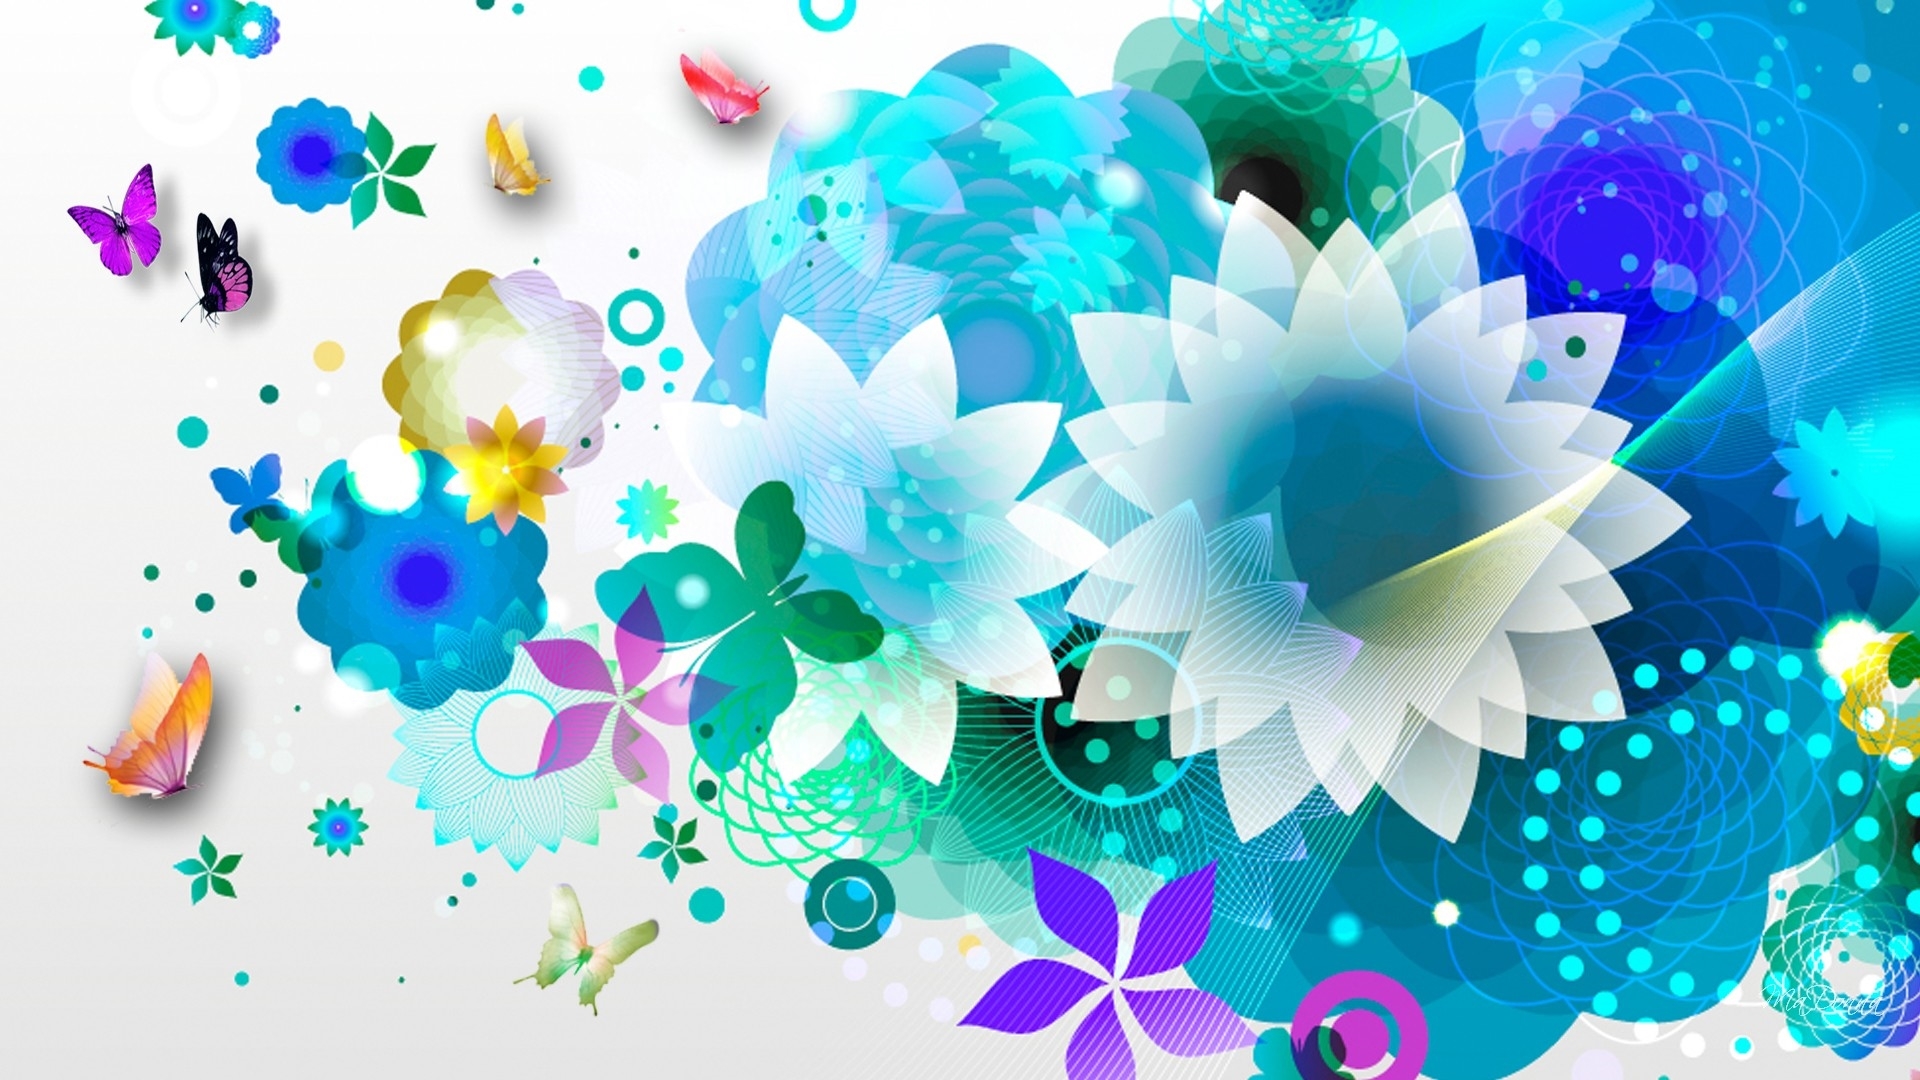 3d And Abstract Wallpapers - HD Desktop Backgrounds - Page 11